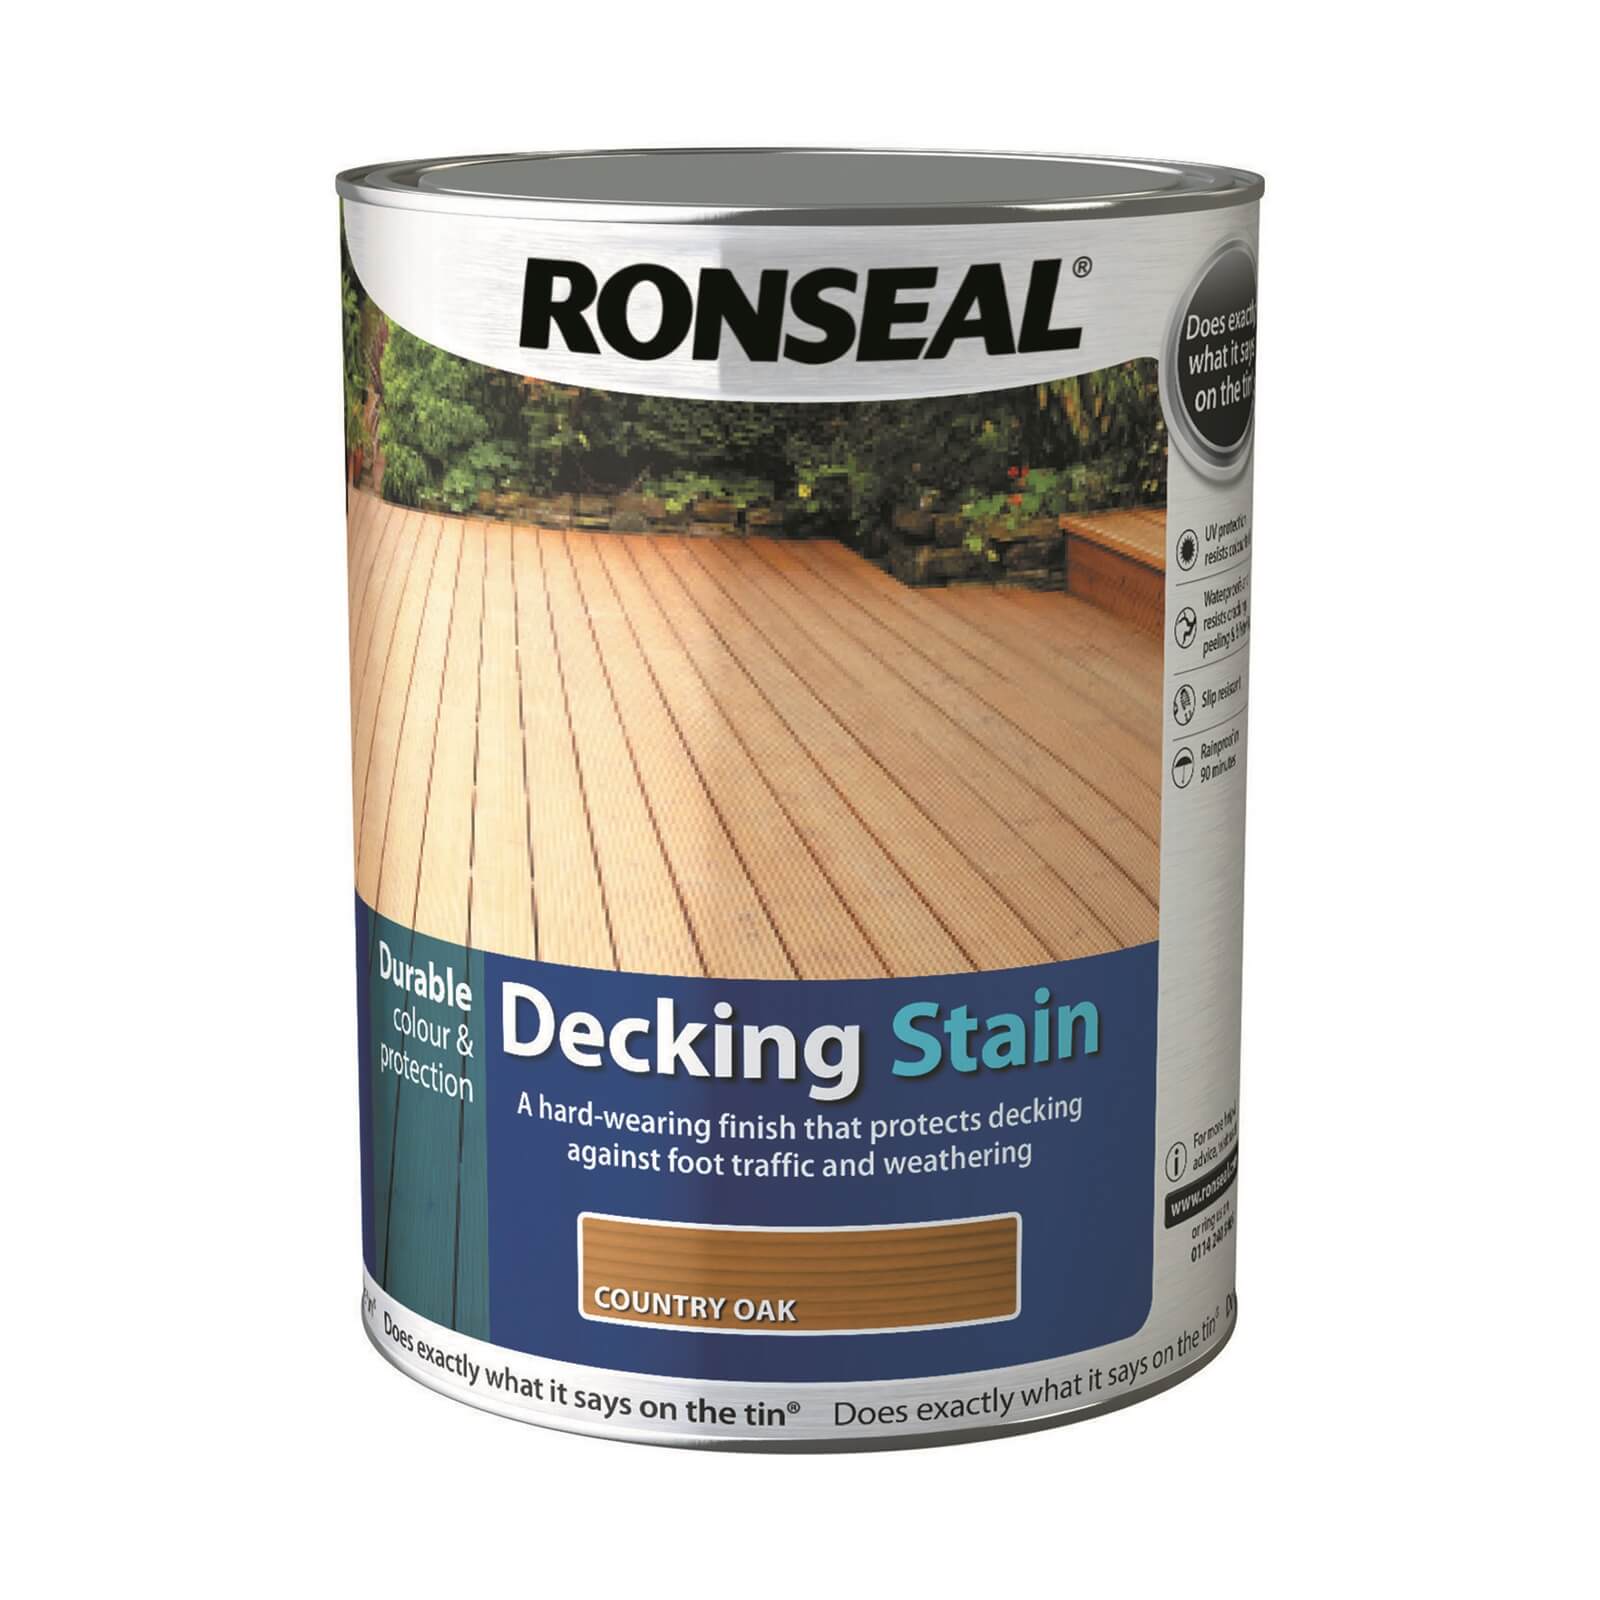 Ronseal Standard Decking Stain Country Oak - 5L